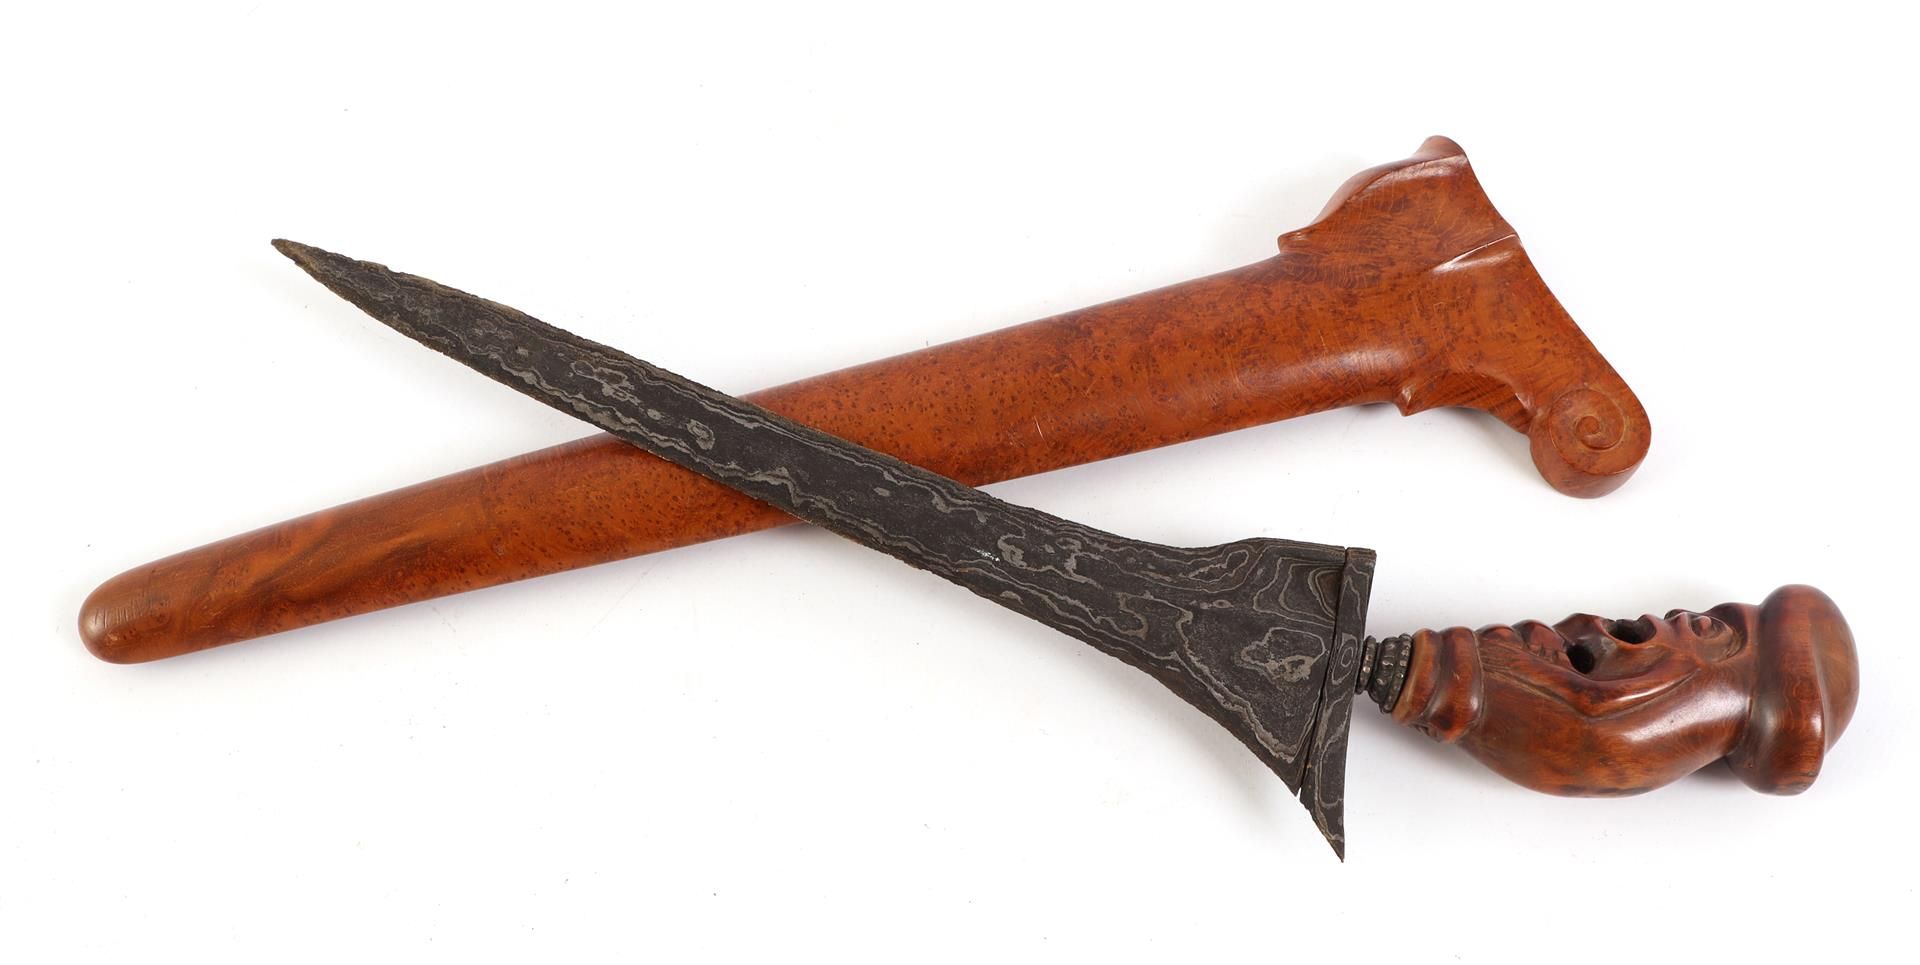 Rare Javanese fertility keris with a straight blade with beautiful pamor (damask). The blade is 18th